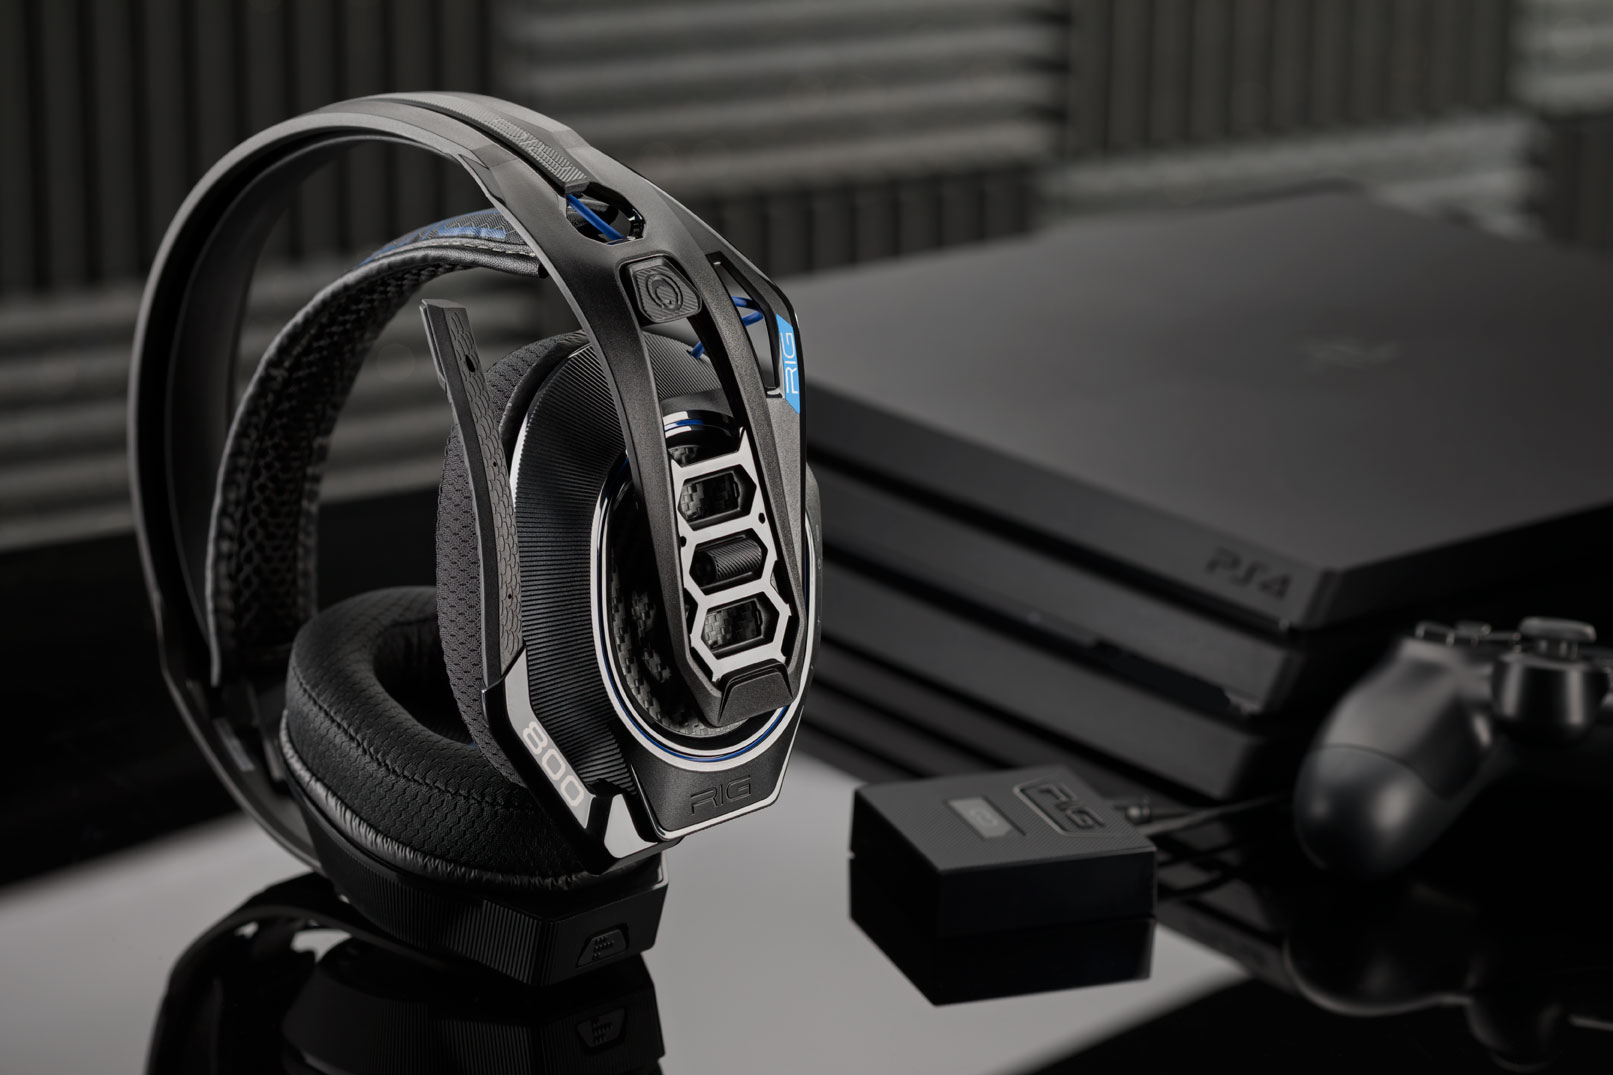 rig 700hs headset